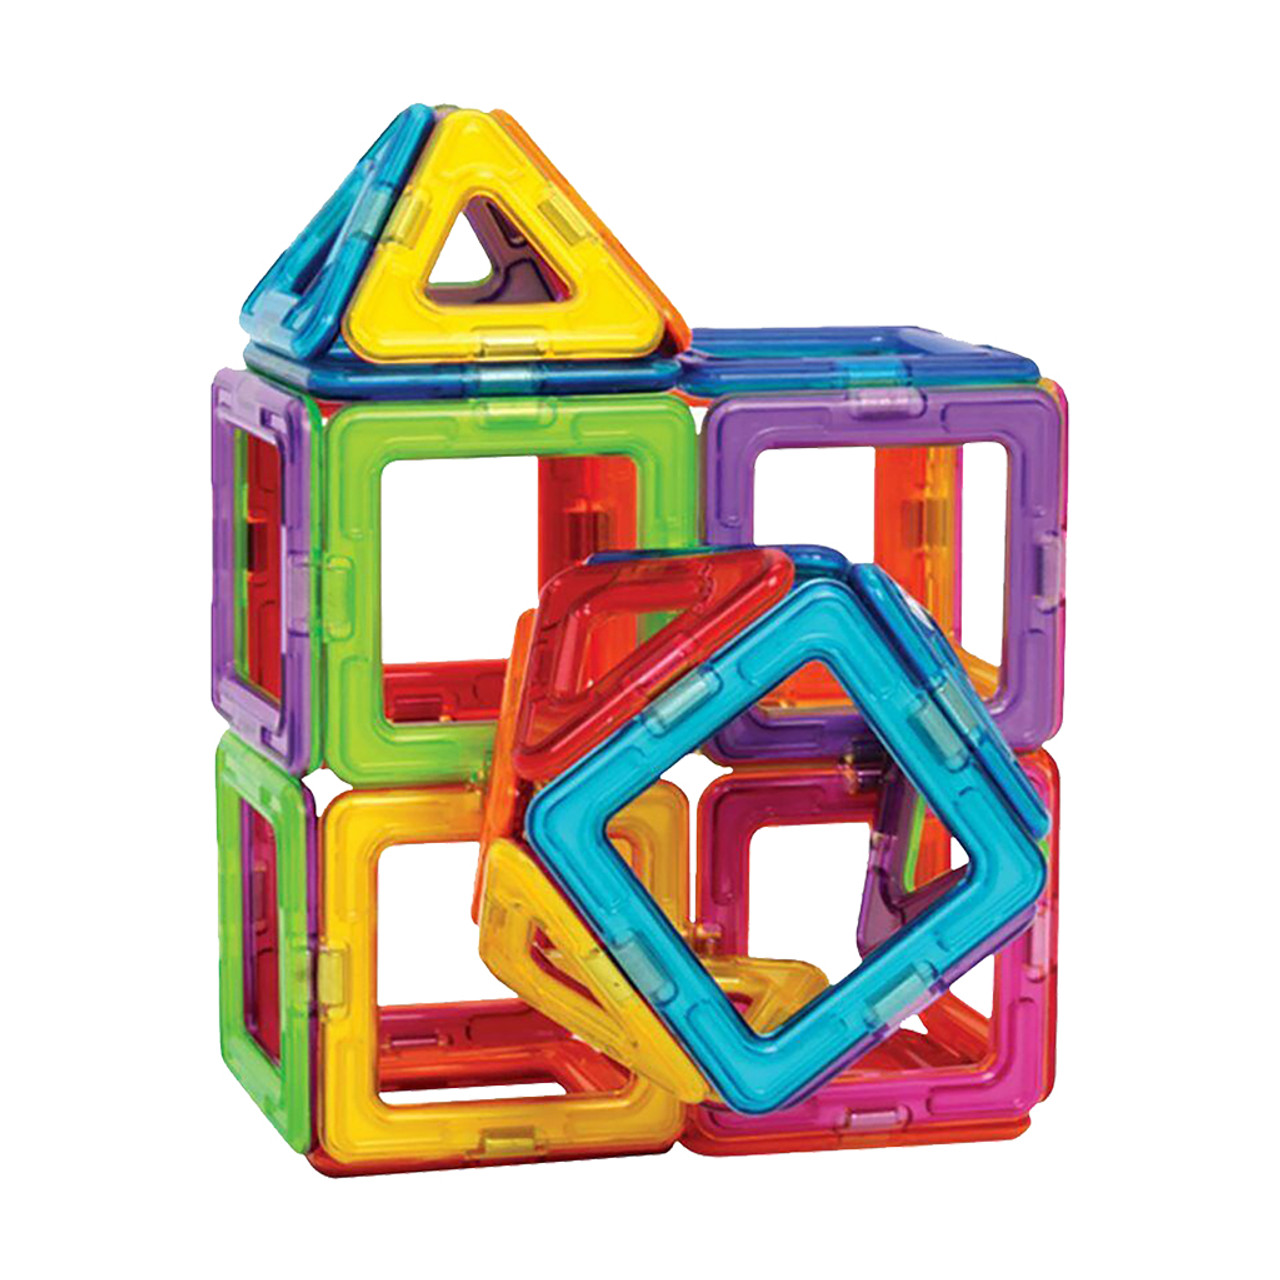 Midwest Technology Magformers - Construction Magnetic Products 26-Piece Set, Rainbow